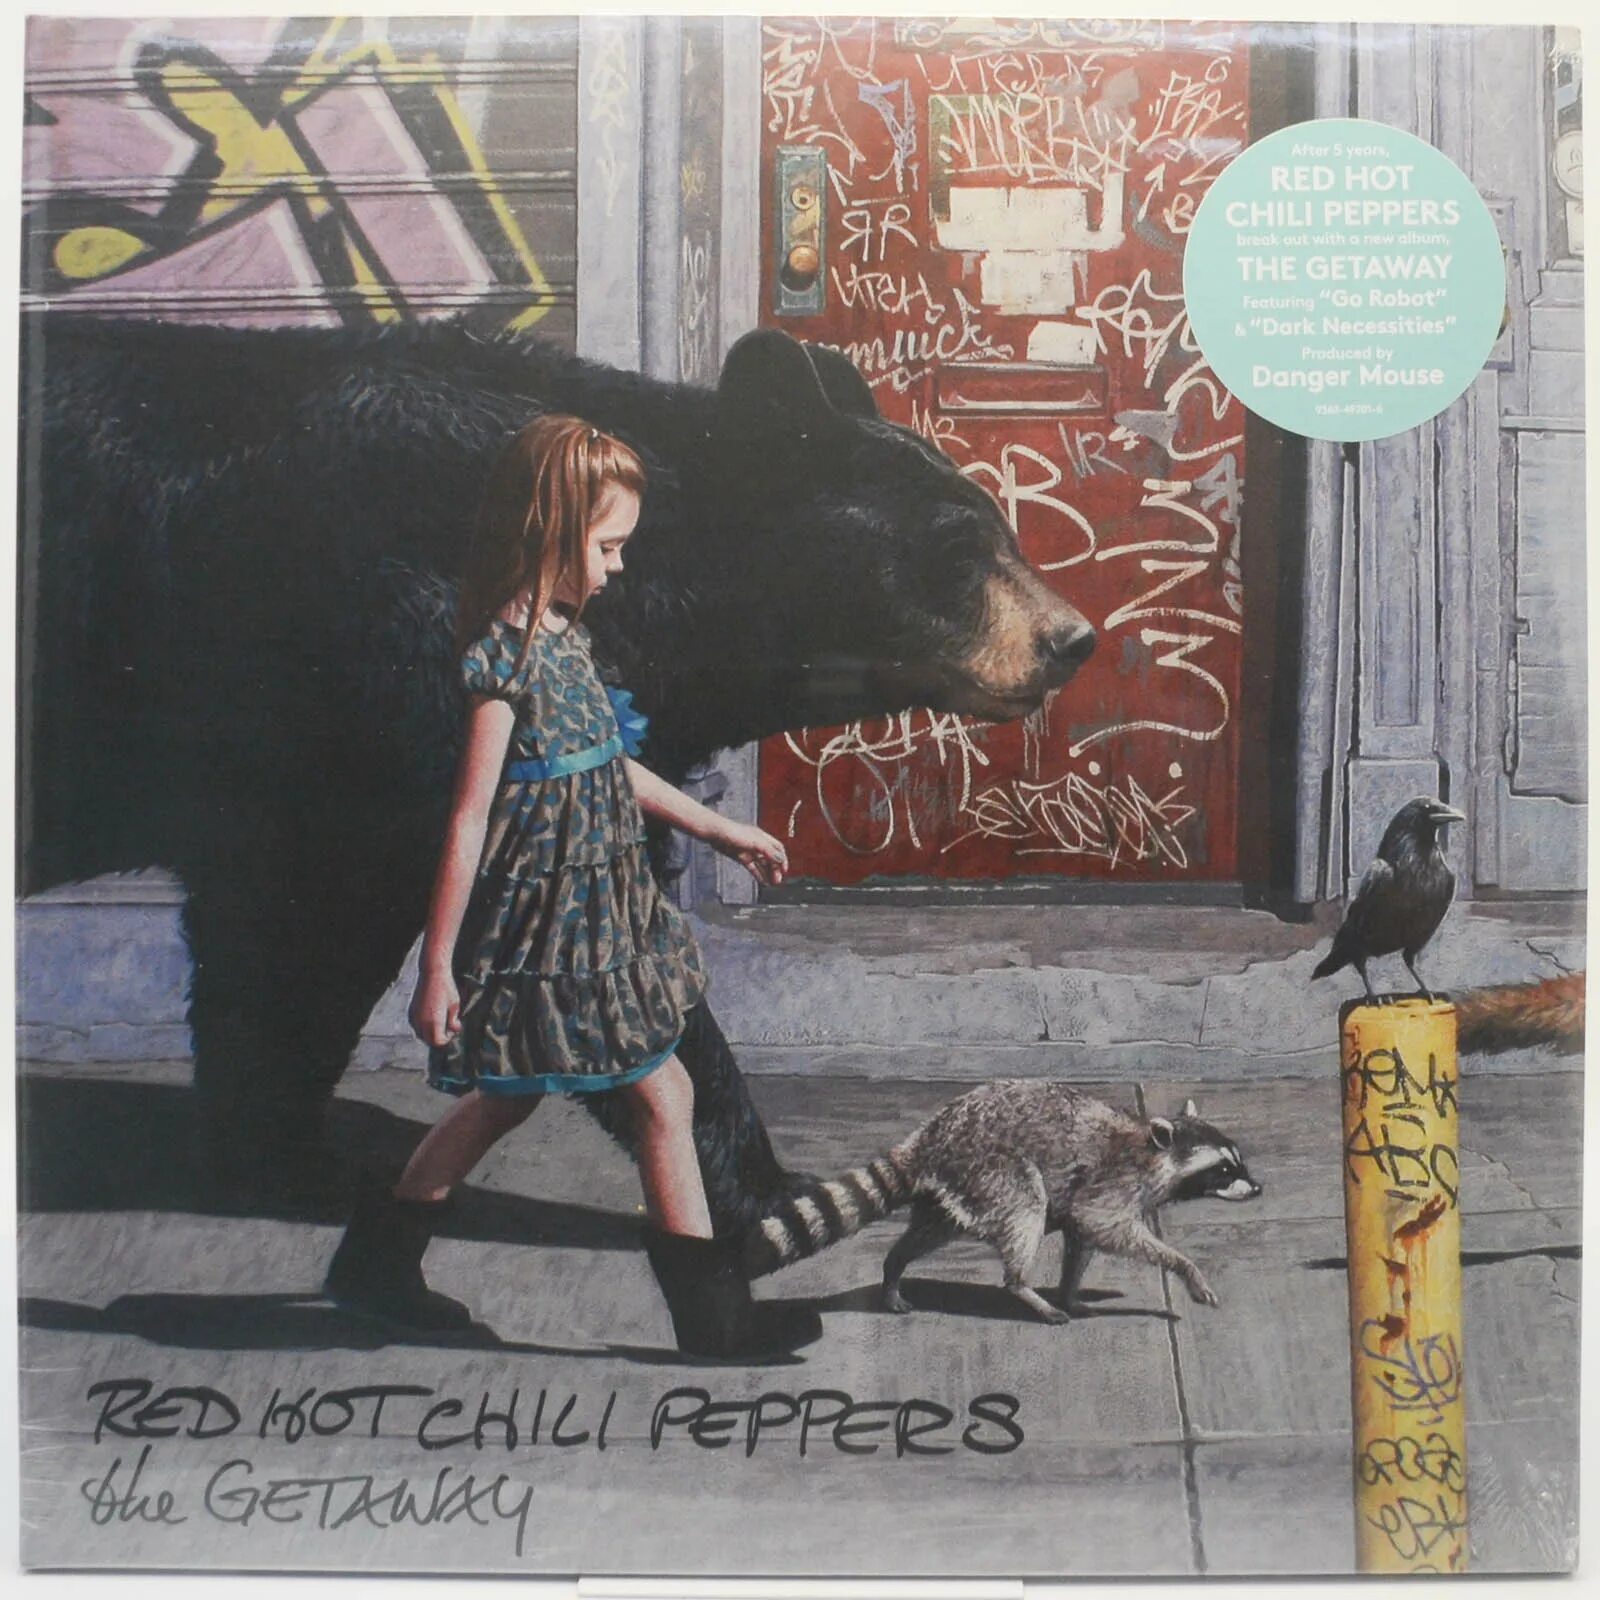 Red hot chili peppers necessities. Red hot Chili Peppers - the Getaway - 2016 - LP. Red hot Chili Peppers the Getaway 2016. The Getaway альбом Red hot Chili Peppers. Red hot Chili Peppers альбомы.